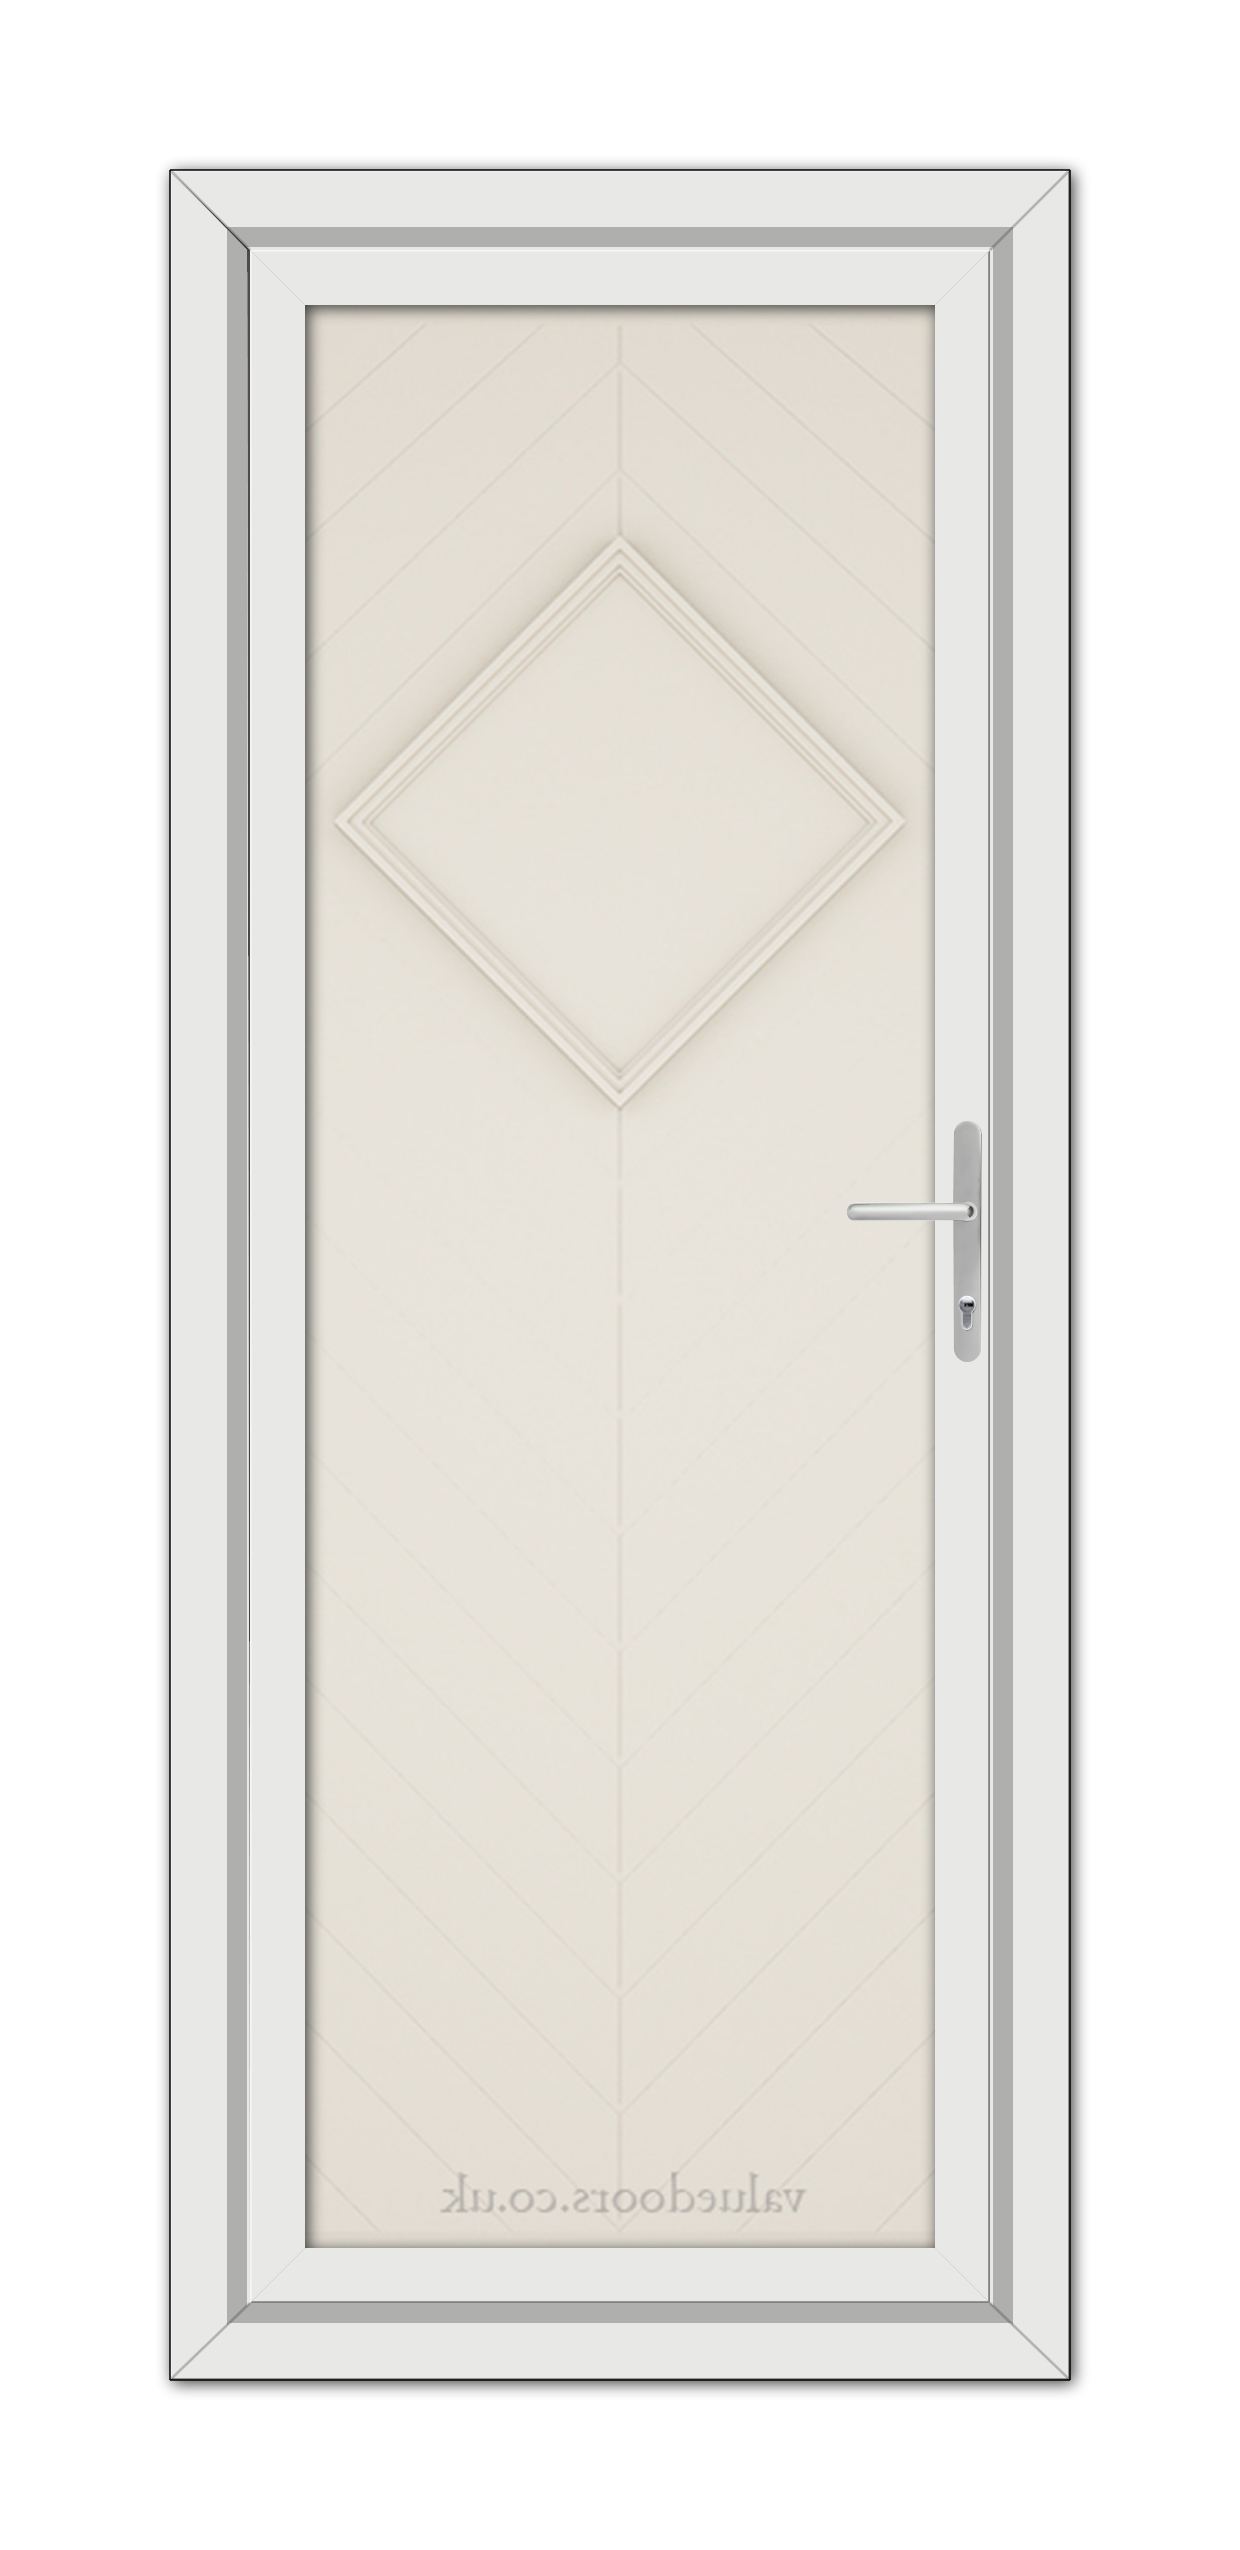 A modern Cream Hamburg Solid uPVC door with a diamond-shaped window and a silver handle, set in a gray frame, viewed from the front.